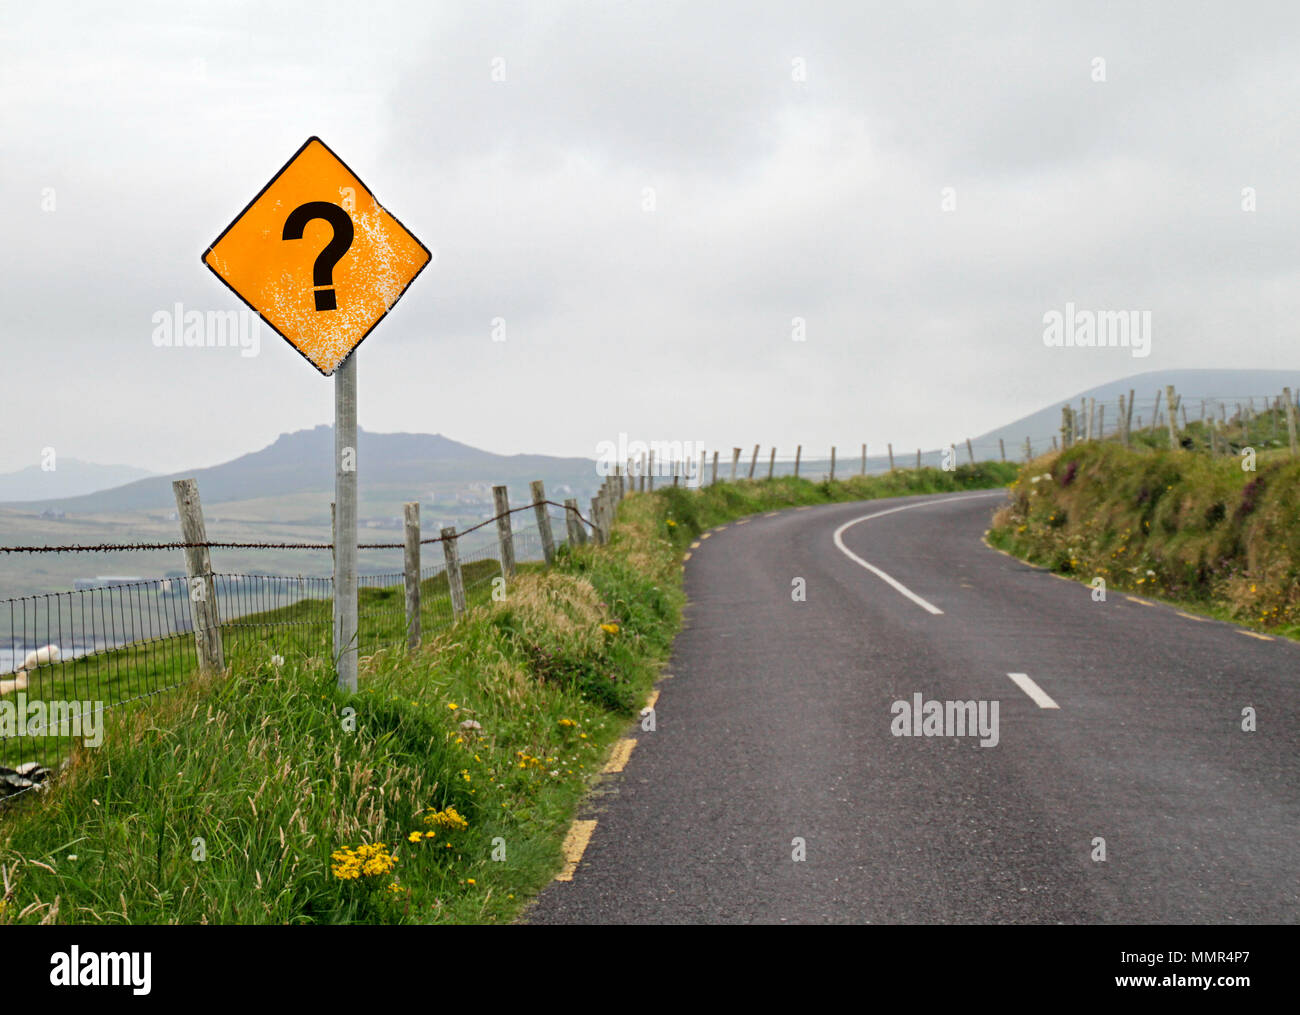 Yellow road sign with question mark Stock Photo